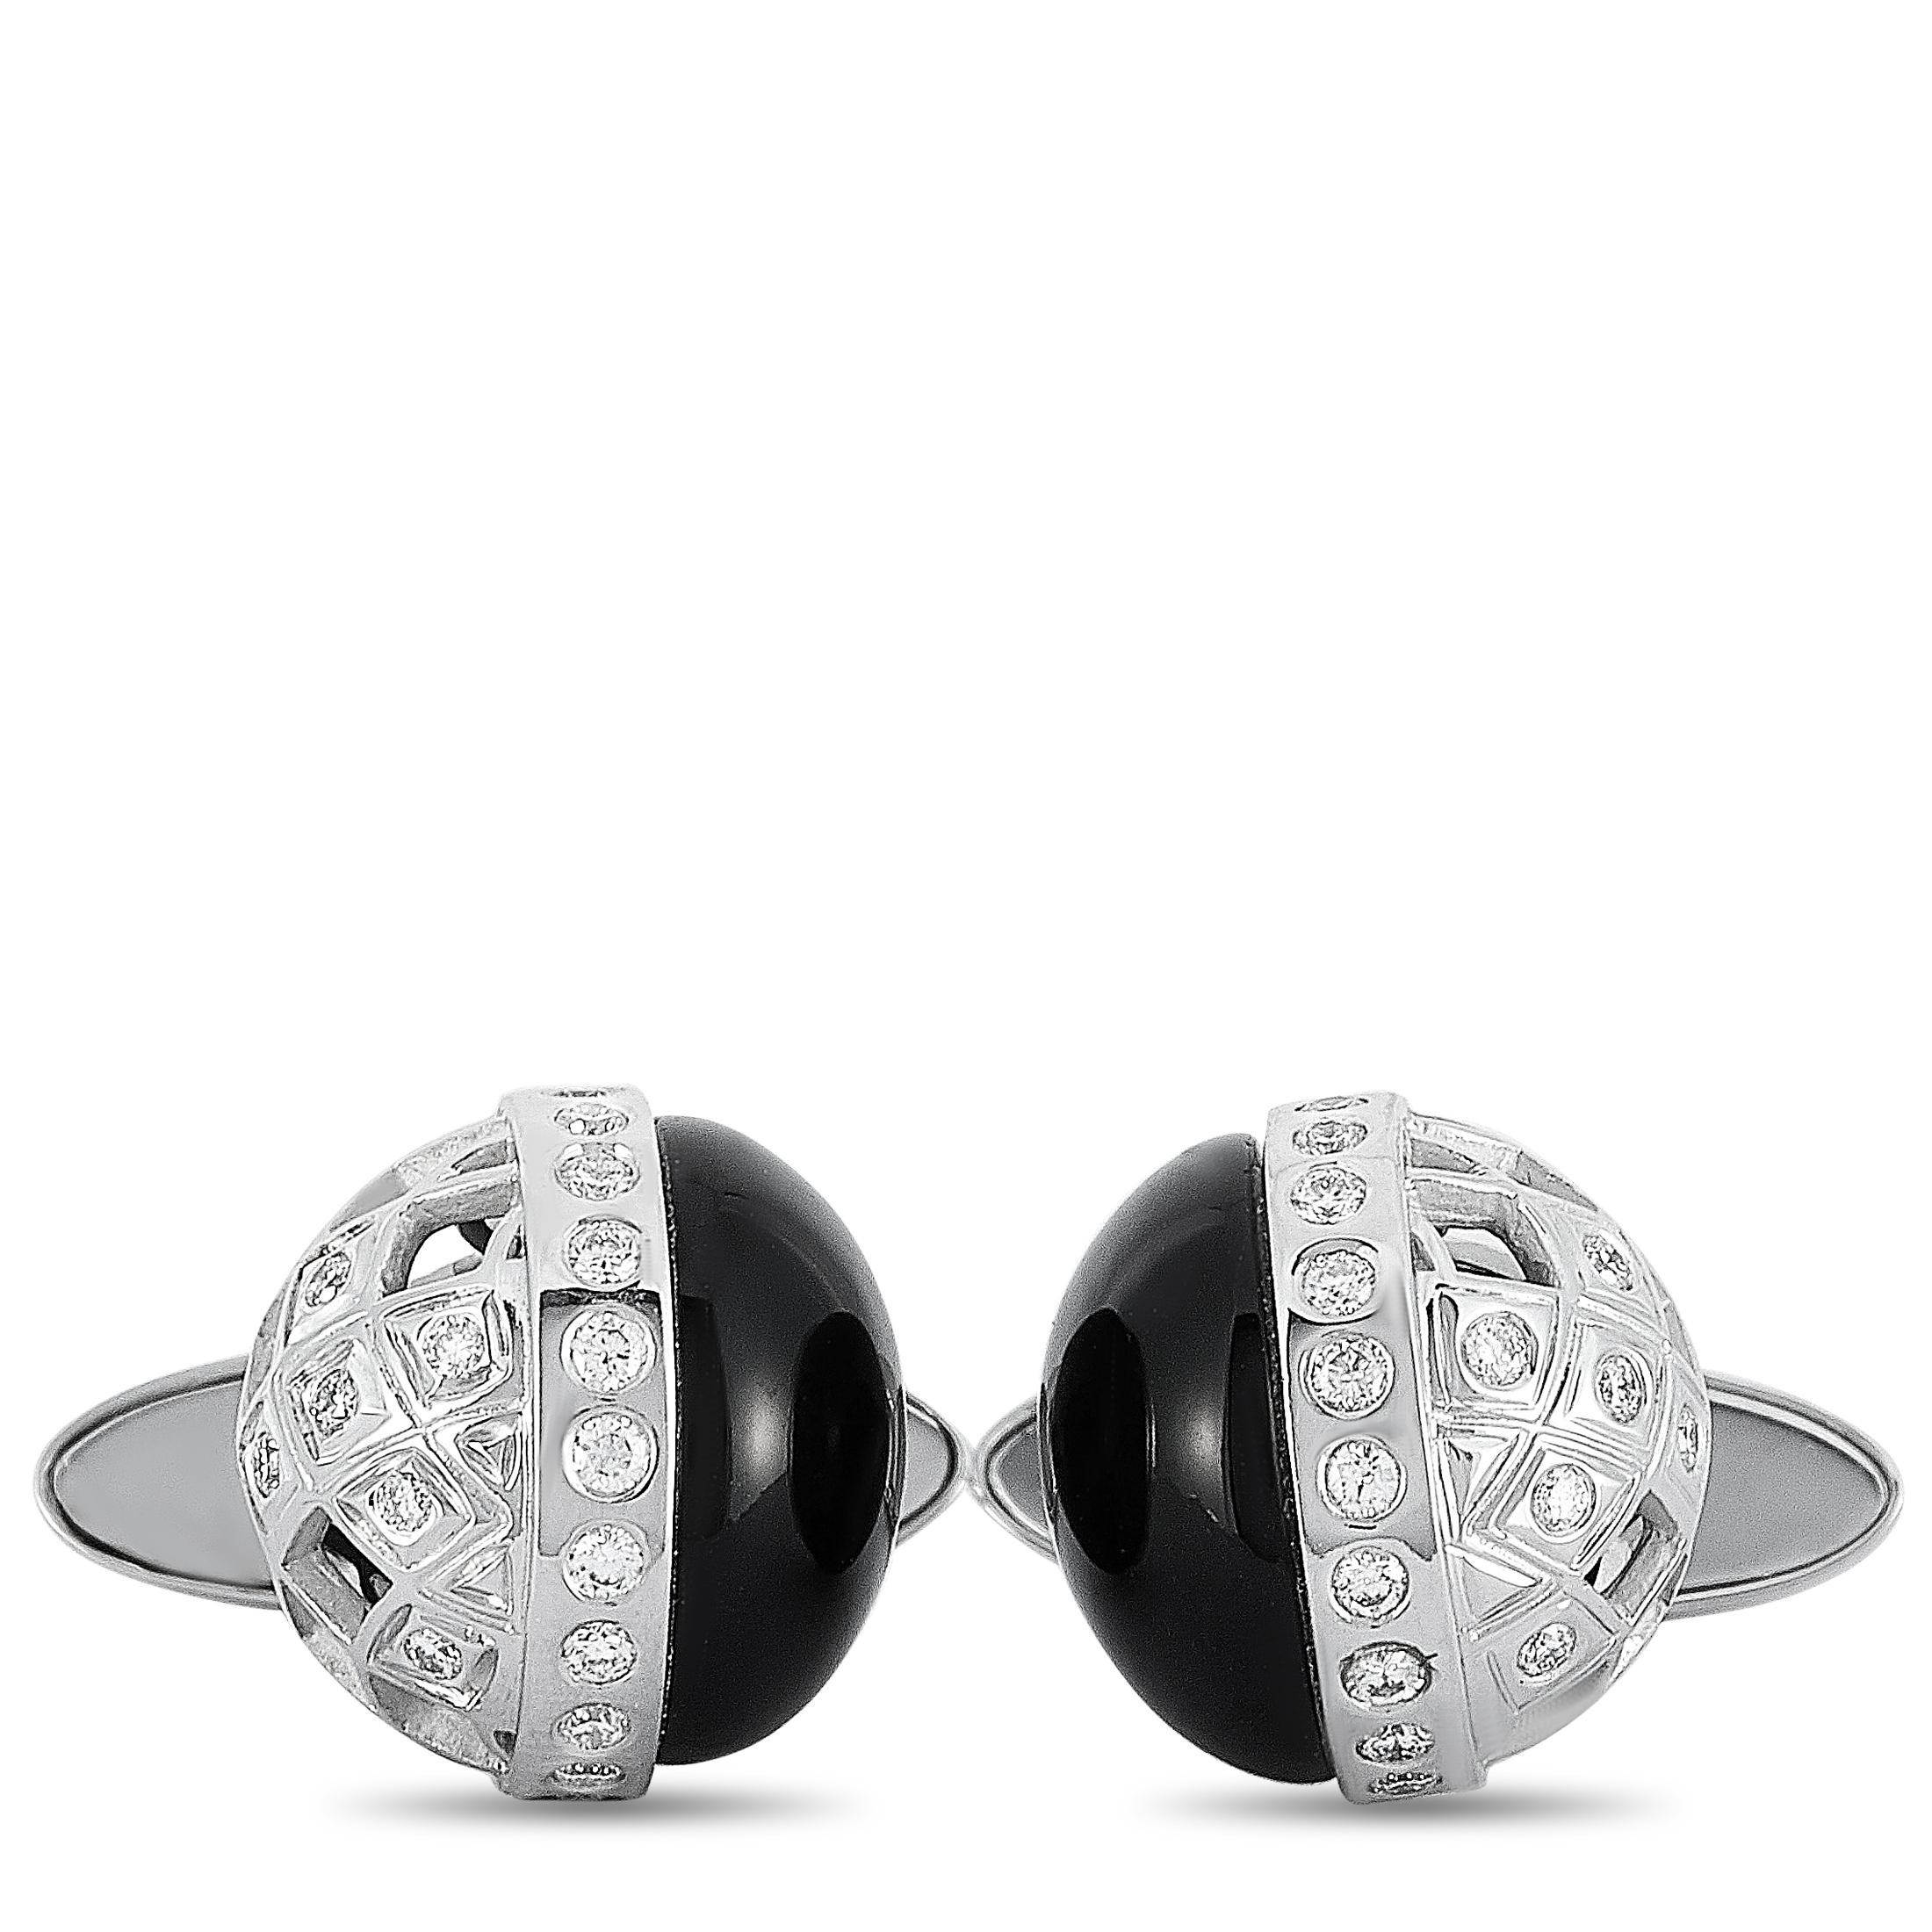 The Carrera y Carrera “Prisma” cufflinks are made of 18K white gold and embellished with onyxes and a total of 0.32 carats of diamonds. The cufflinks measure 0.45” in length and 0.45” in width and each of the two weighs 3.8 grams.

The pair is